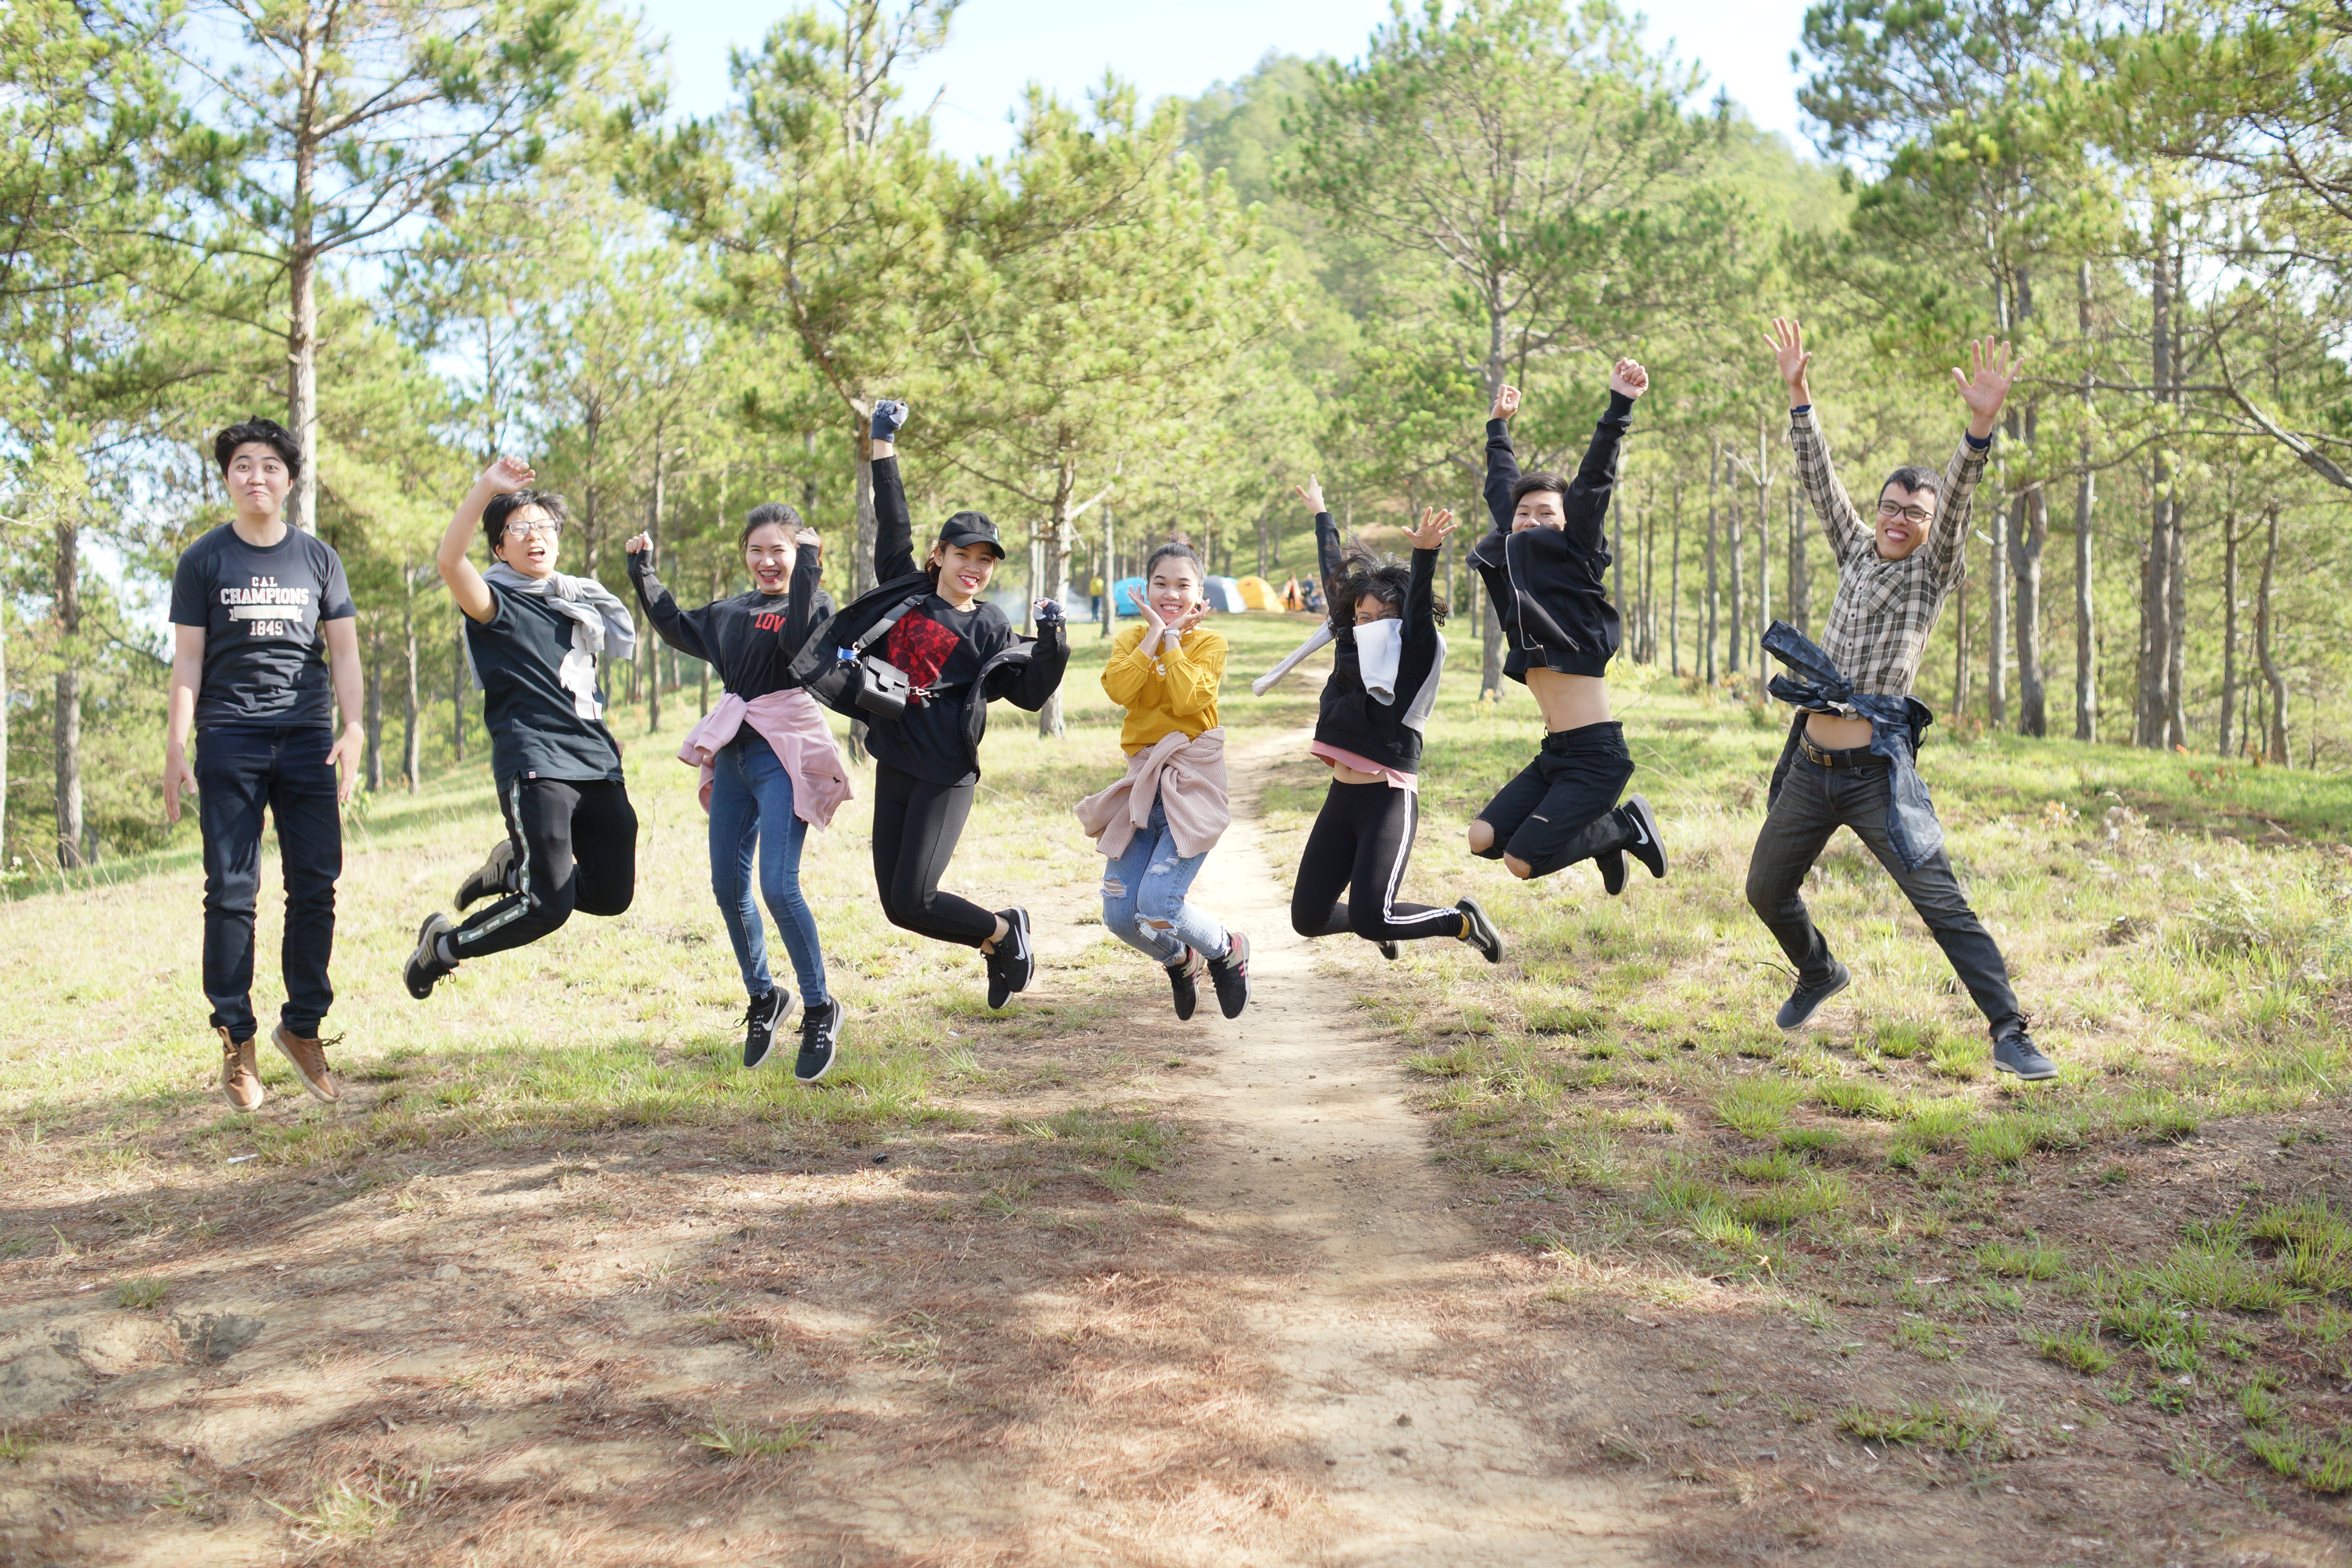 Eight students who are part of a classroom community jumping in unison with a forest in the background.